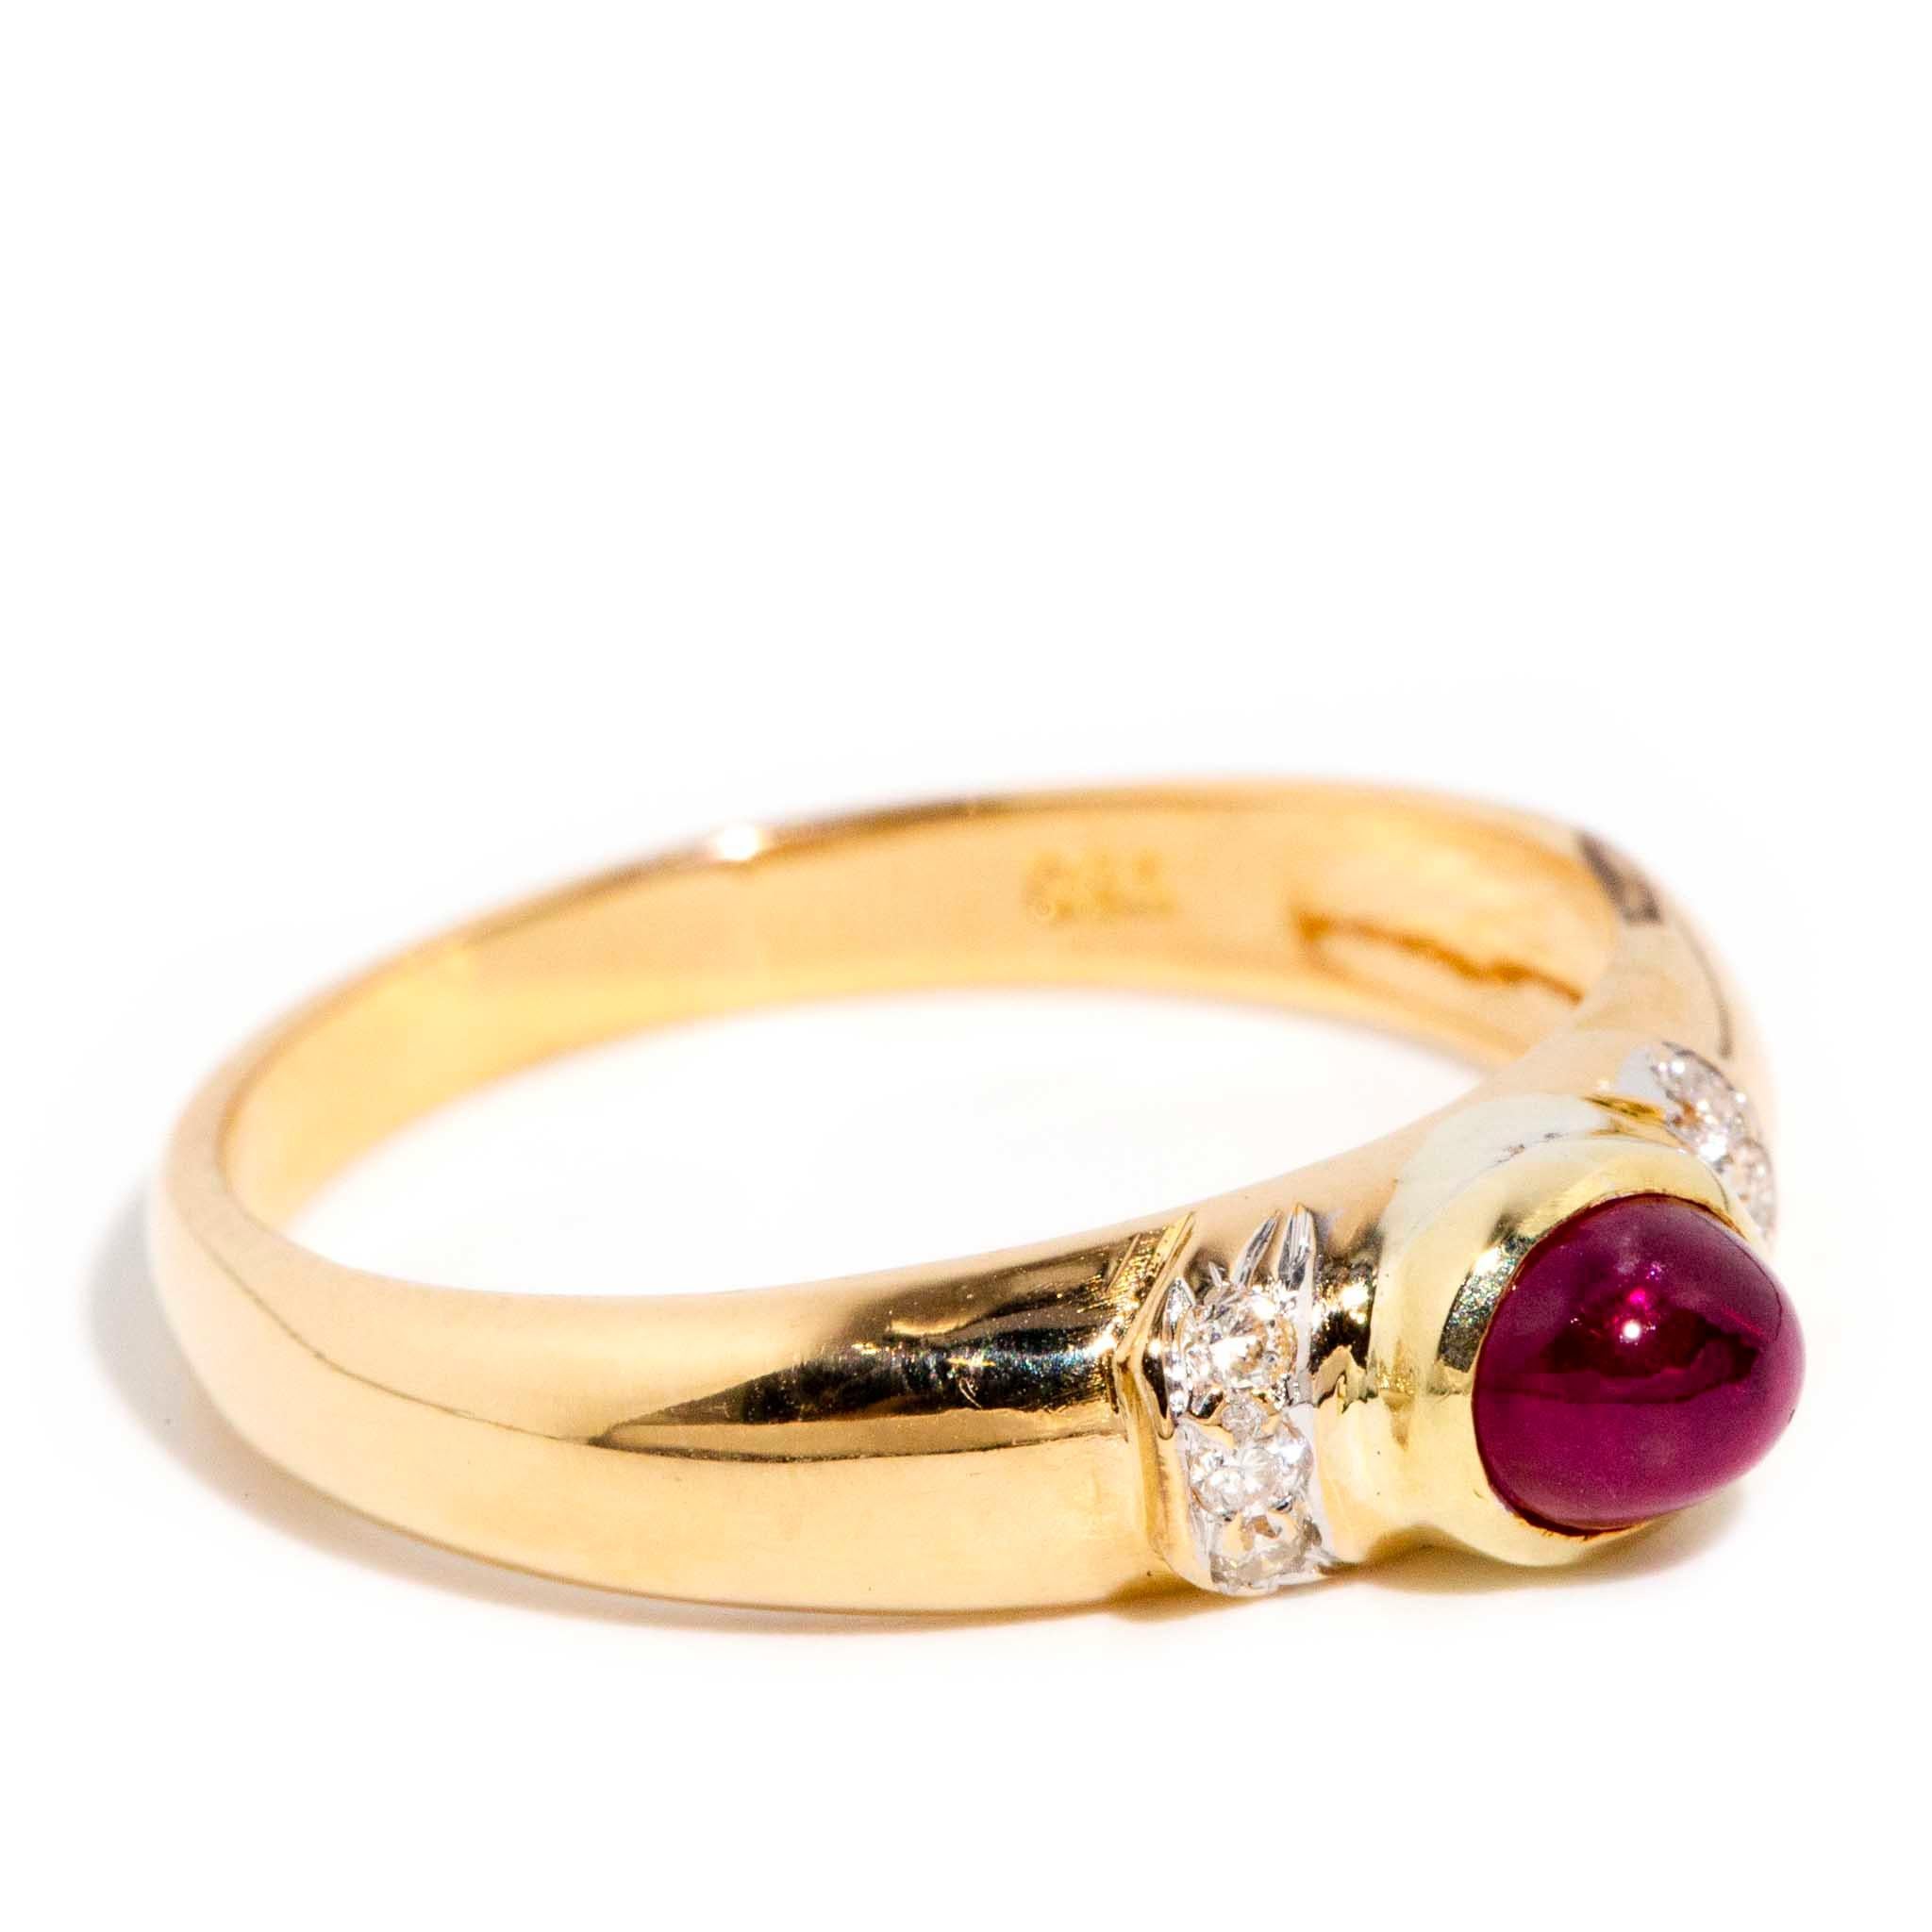 Forged in 18 carat gold, The Santina Ring is both refined and resplendent.  The gorgeous crimson of the ruby cabochon rests atop like the finest jewel in the crown.  

The Santina Ring Gem Details
The bright deep red oval ruby cabochon measures